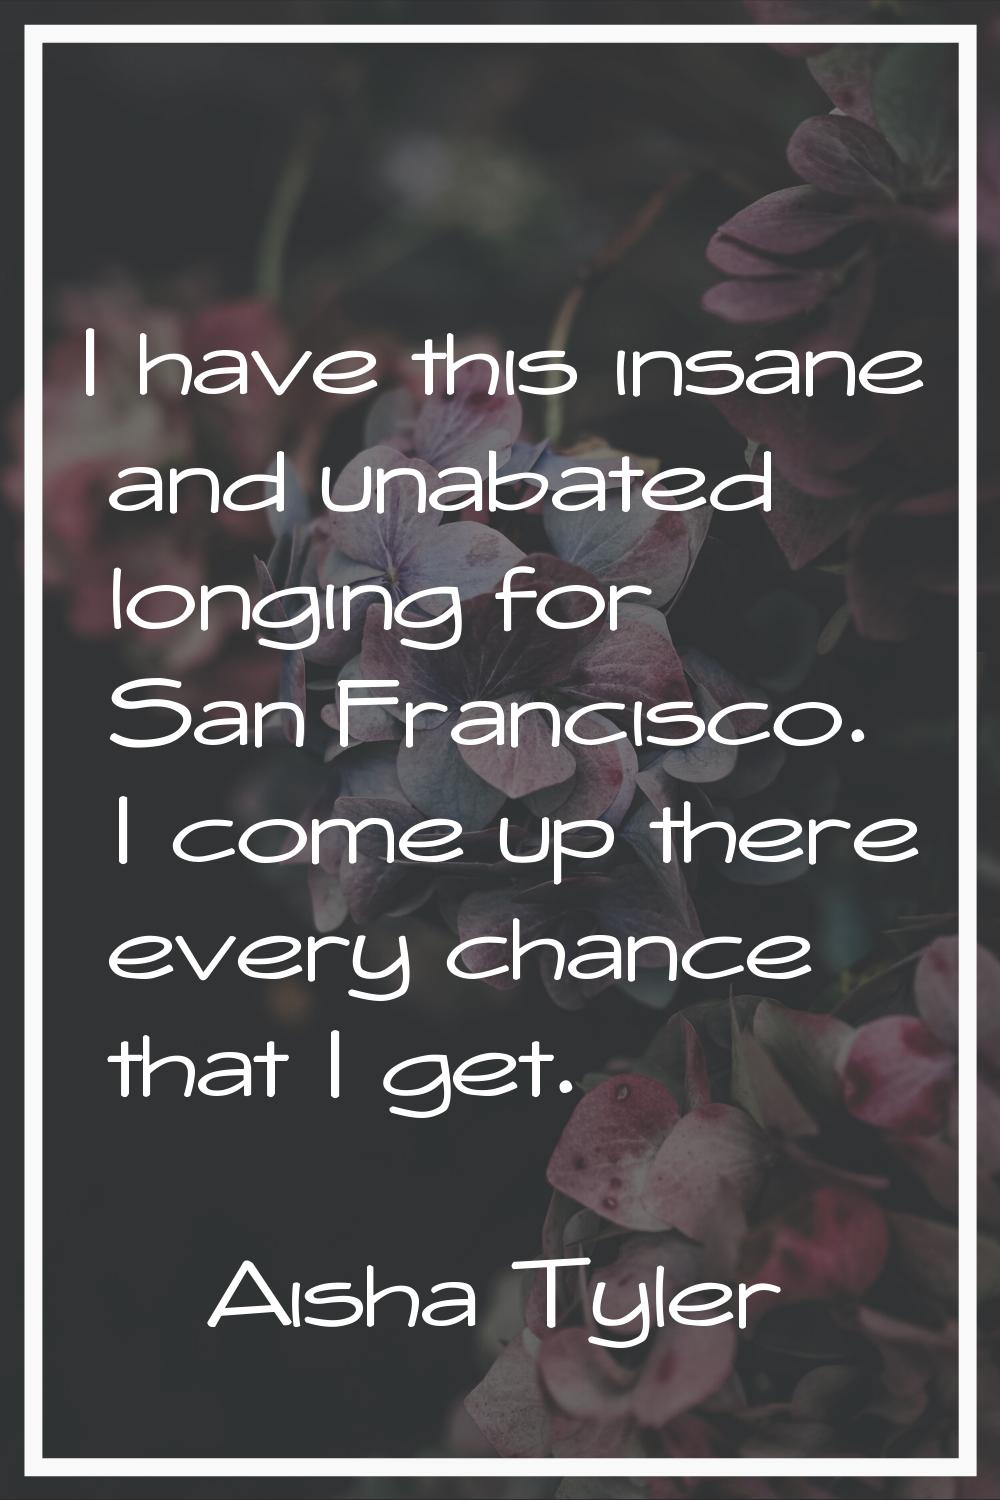 I have this insane and unabated longing for San Francisco. I come up there every chance that I get.